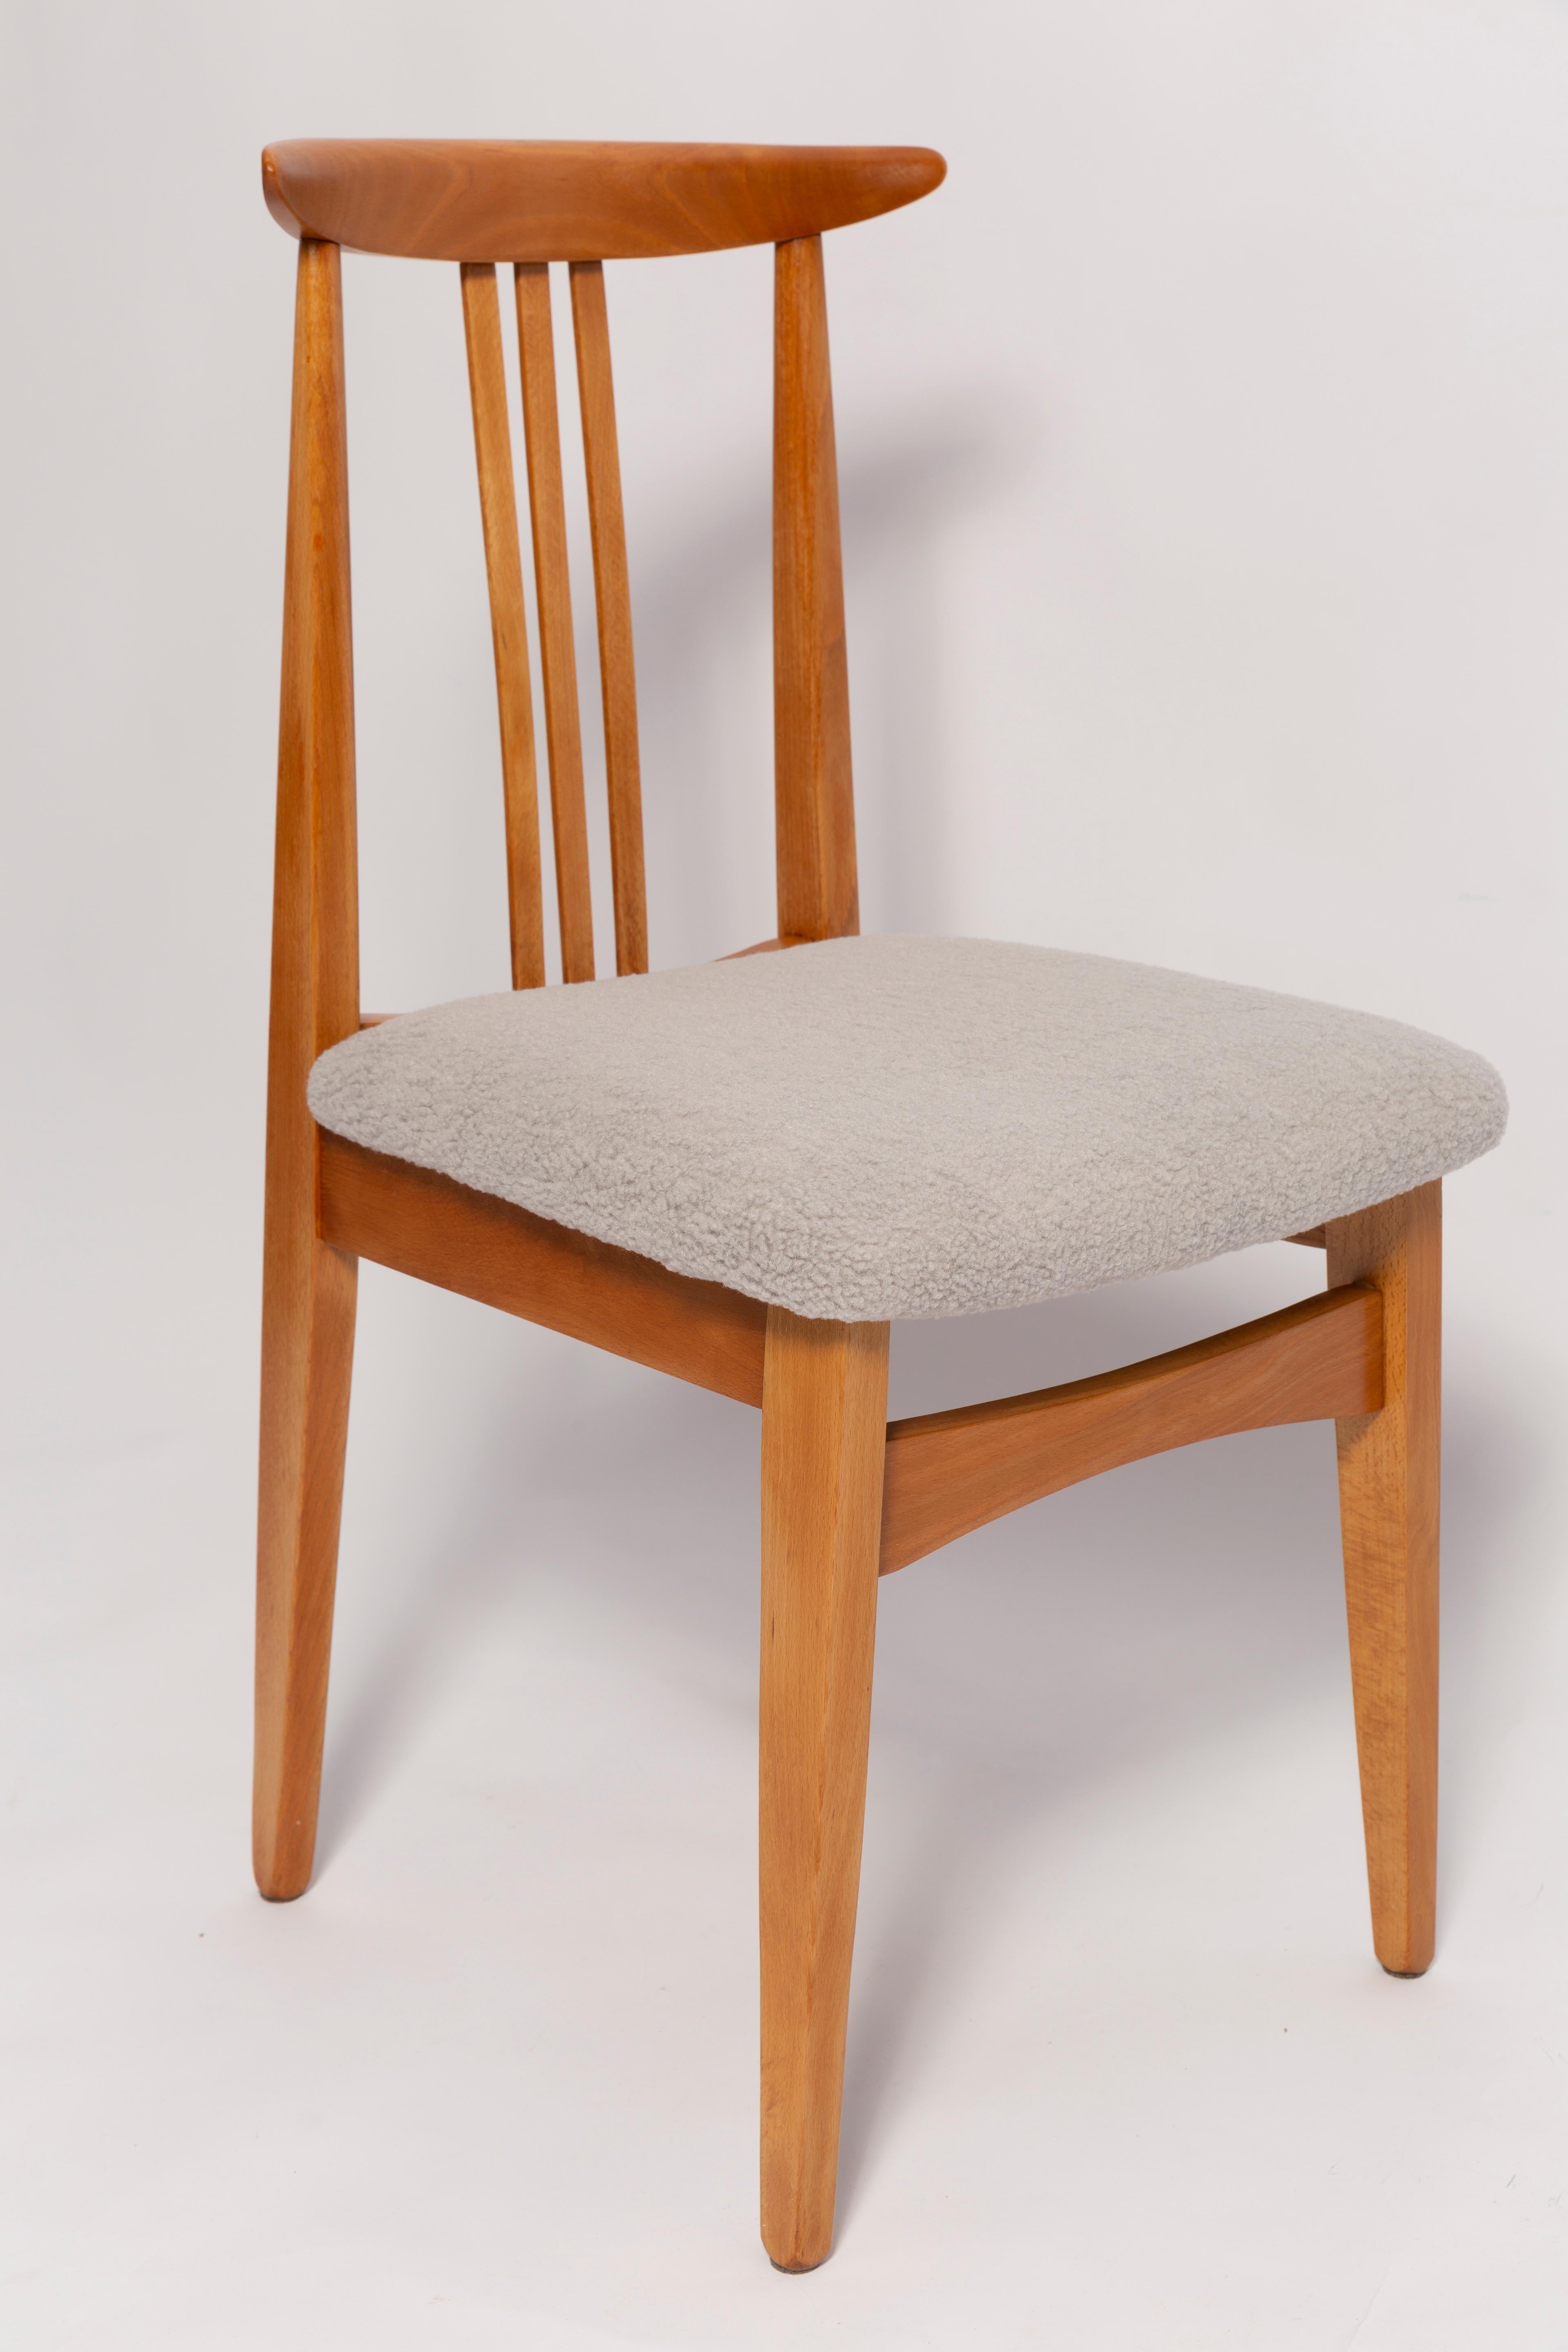 Mid-Century Linen Boucle Chair, Light Wood, by M. Zielinski, Europe, 1960s For Sale 2